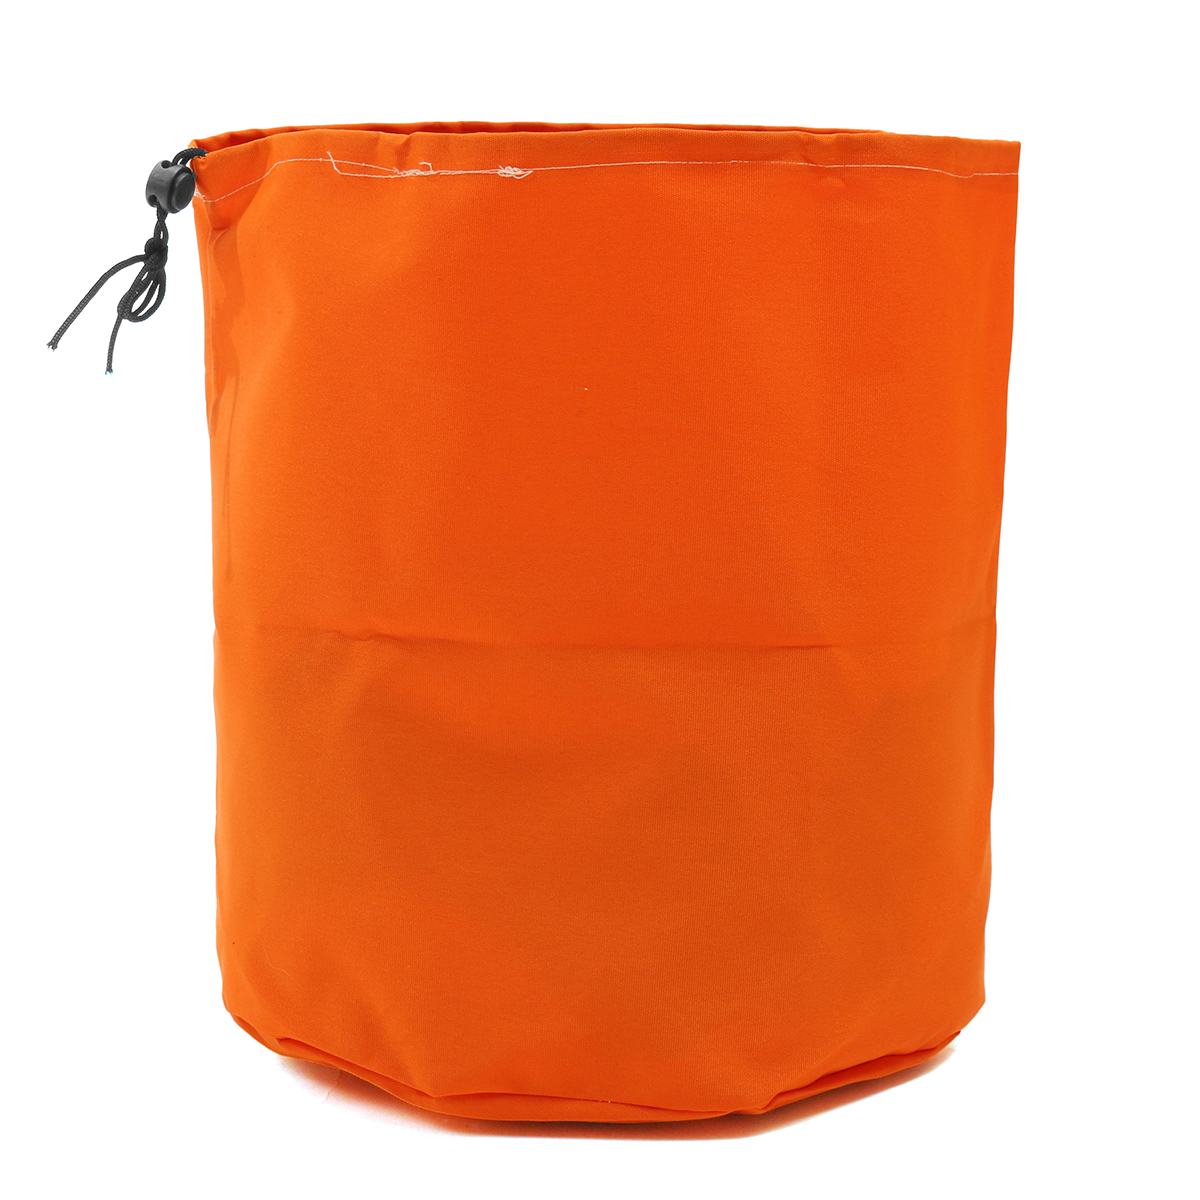 440x325mm-Engine-Cover-Dustproof-Bag-Three-Color-Fits-for-Trimmer-Edger-Pole-saw-1233496-7